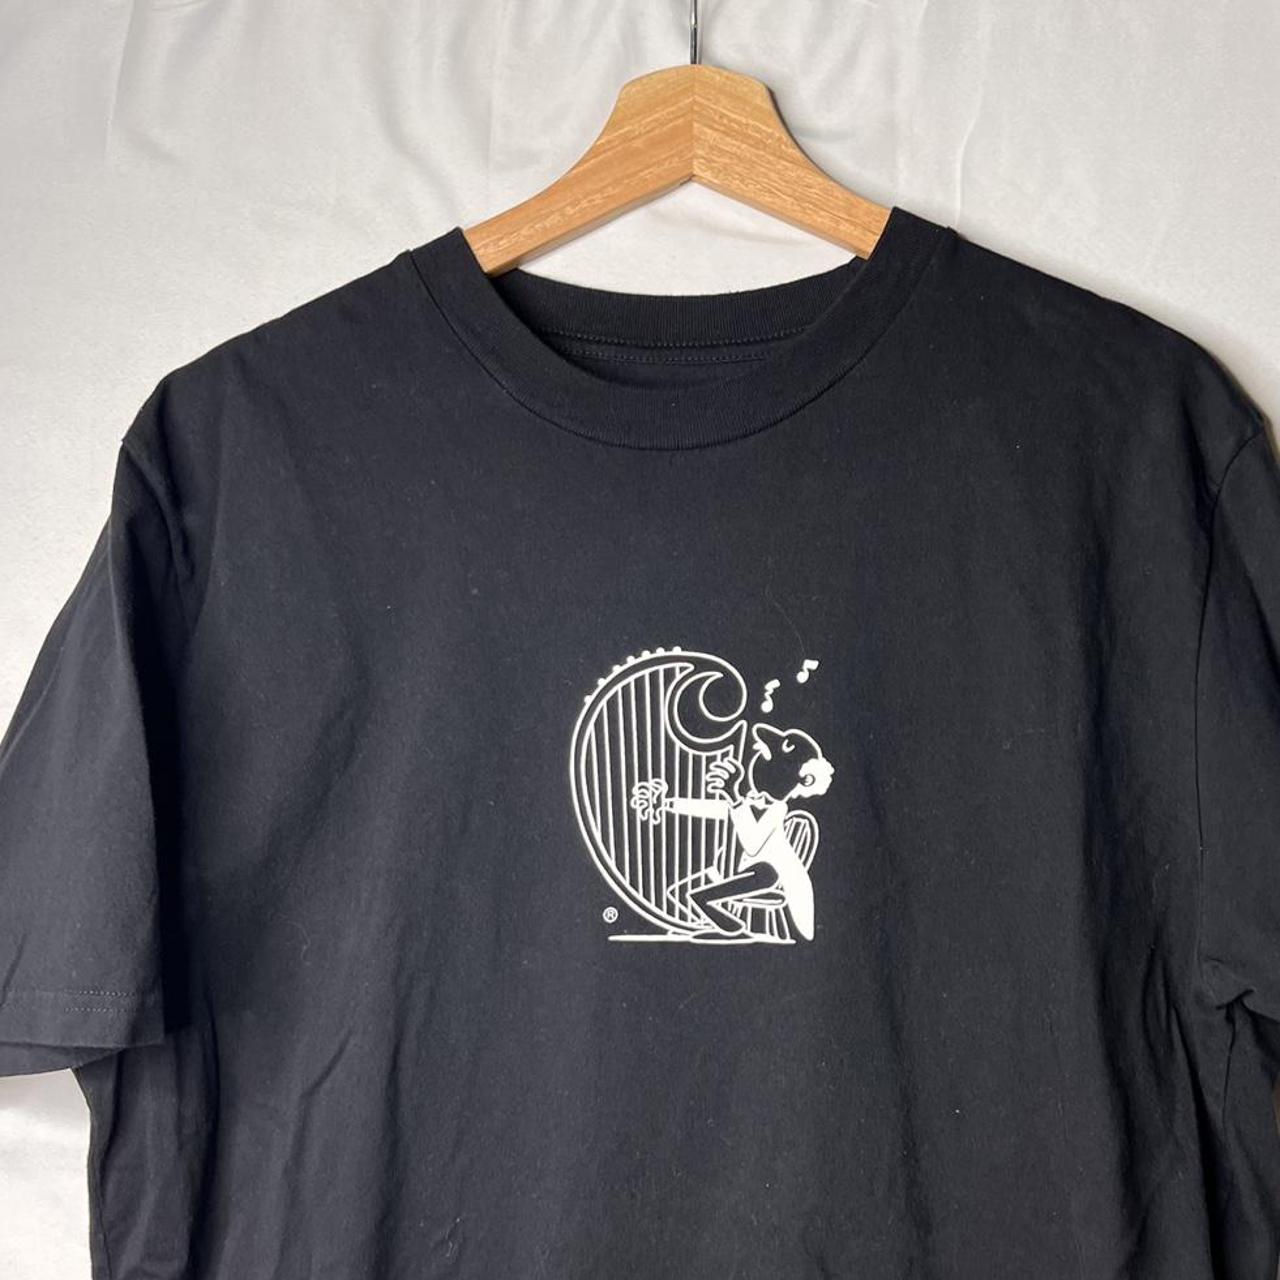 Product Image 2 - Carhartt WIP Harp T-Shirt

SIze L.